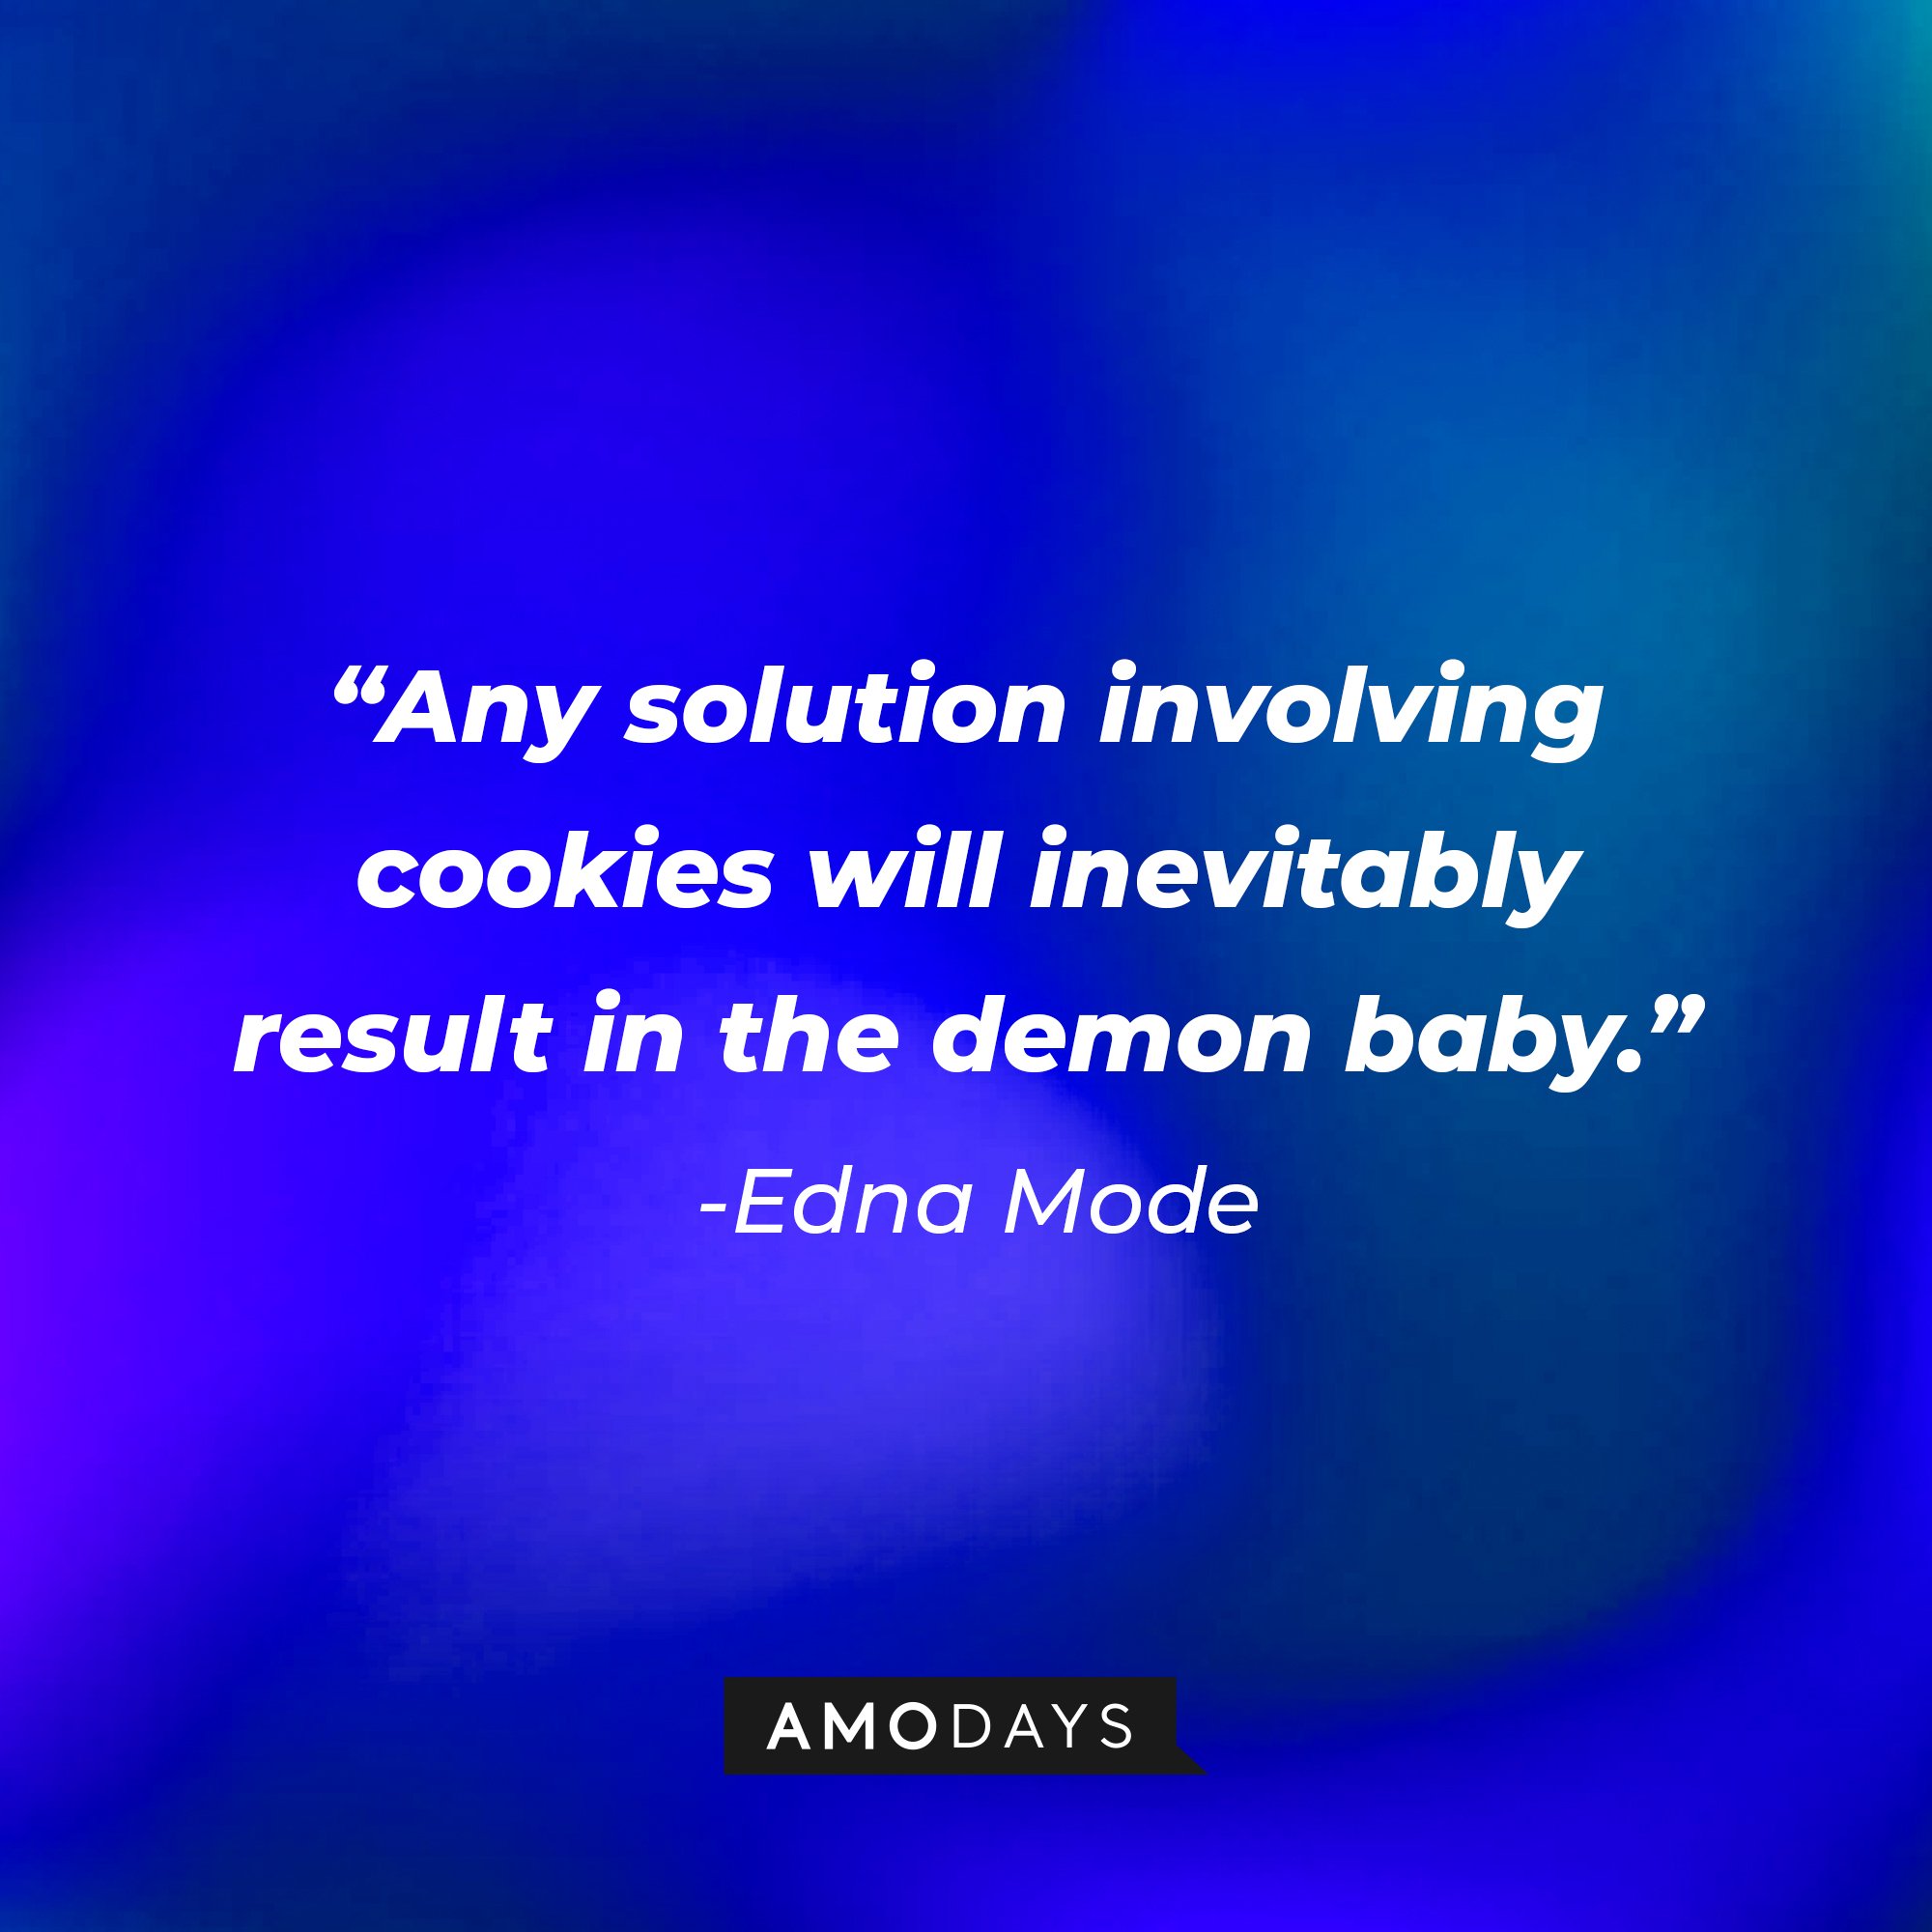  Edna Mode’s quote: "Any solution involving cookies will inevitably result in the demon baby." | Image: AmoDays